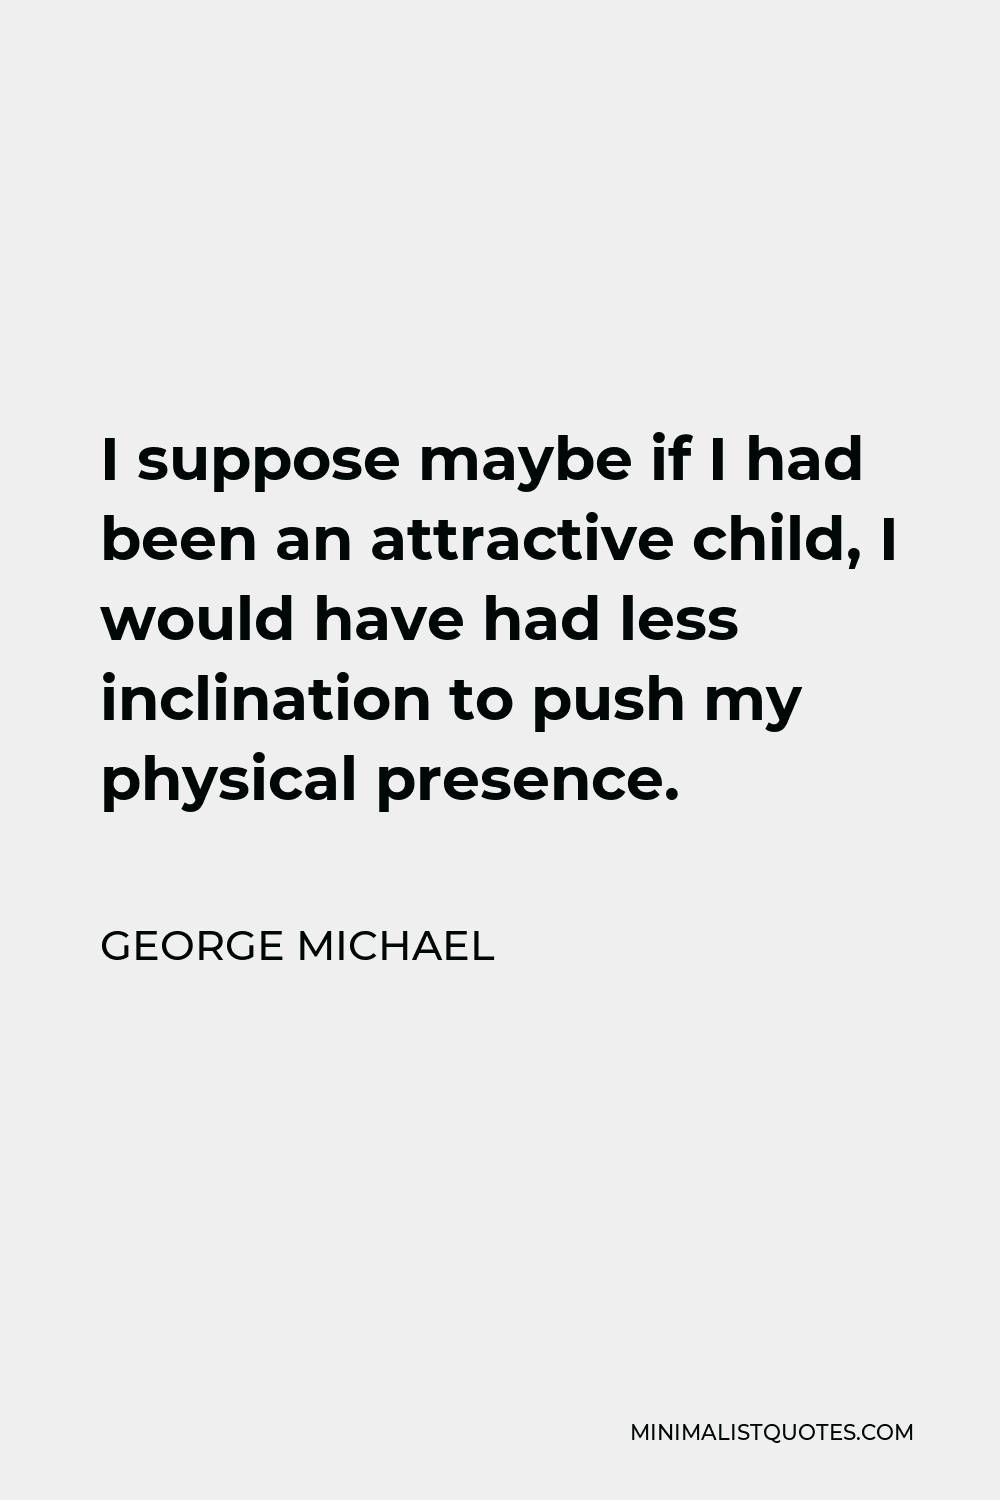 George Michael Quote - I suppose maybe if I had been an attractive child, I would have had less inclination to push my physical presence.